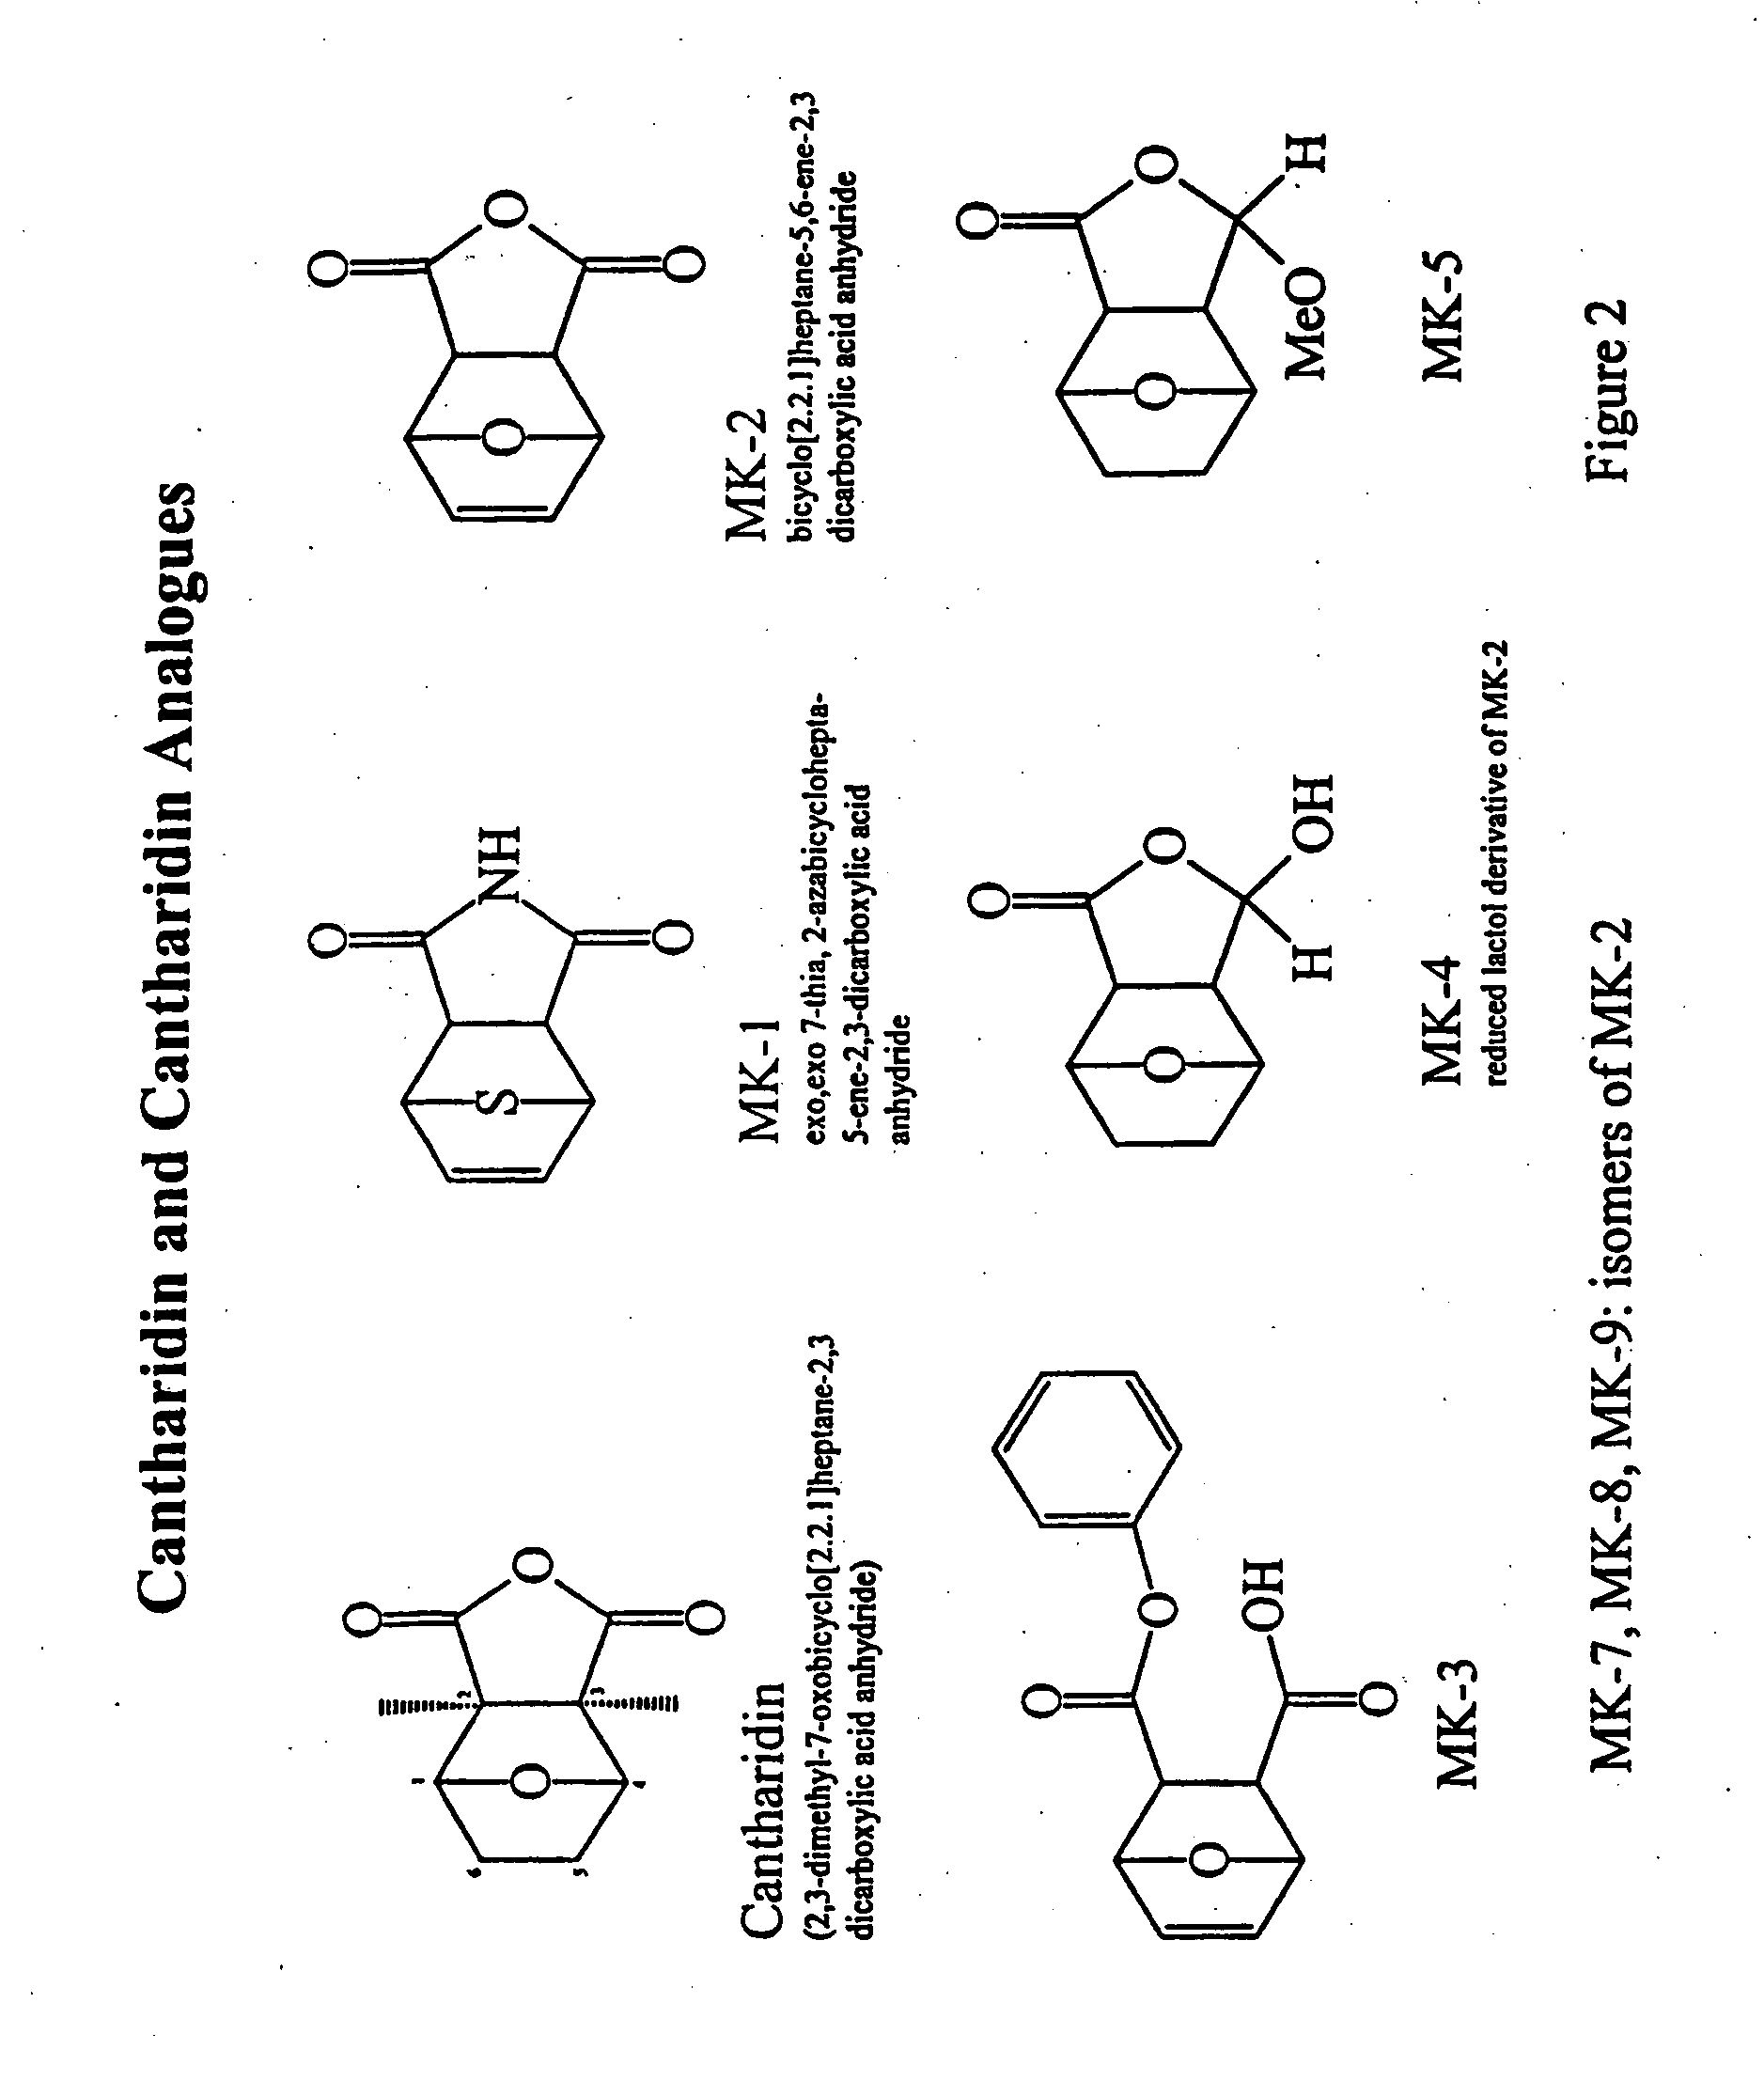 Anhydride modified cantharidin analogues useful in the treatment of cancer